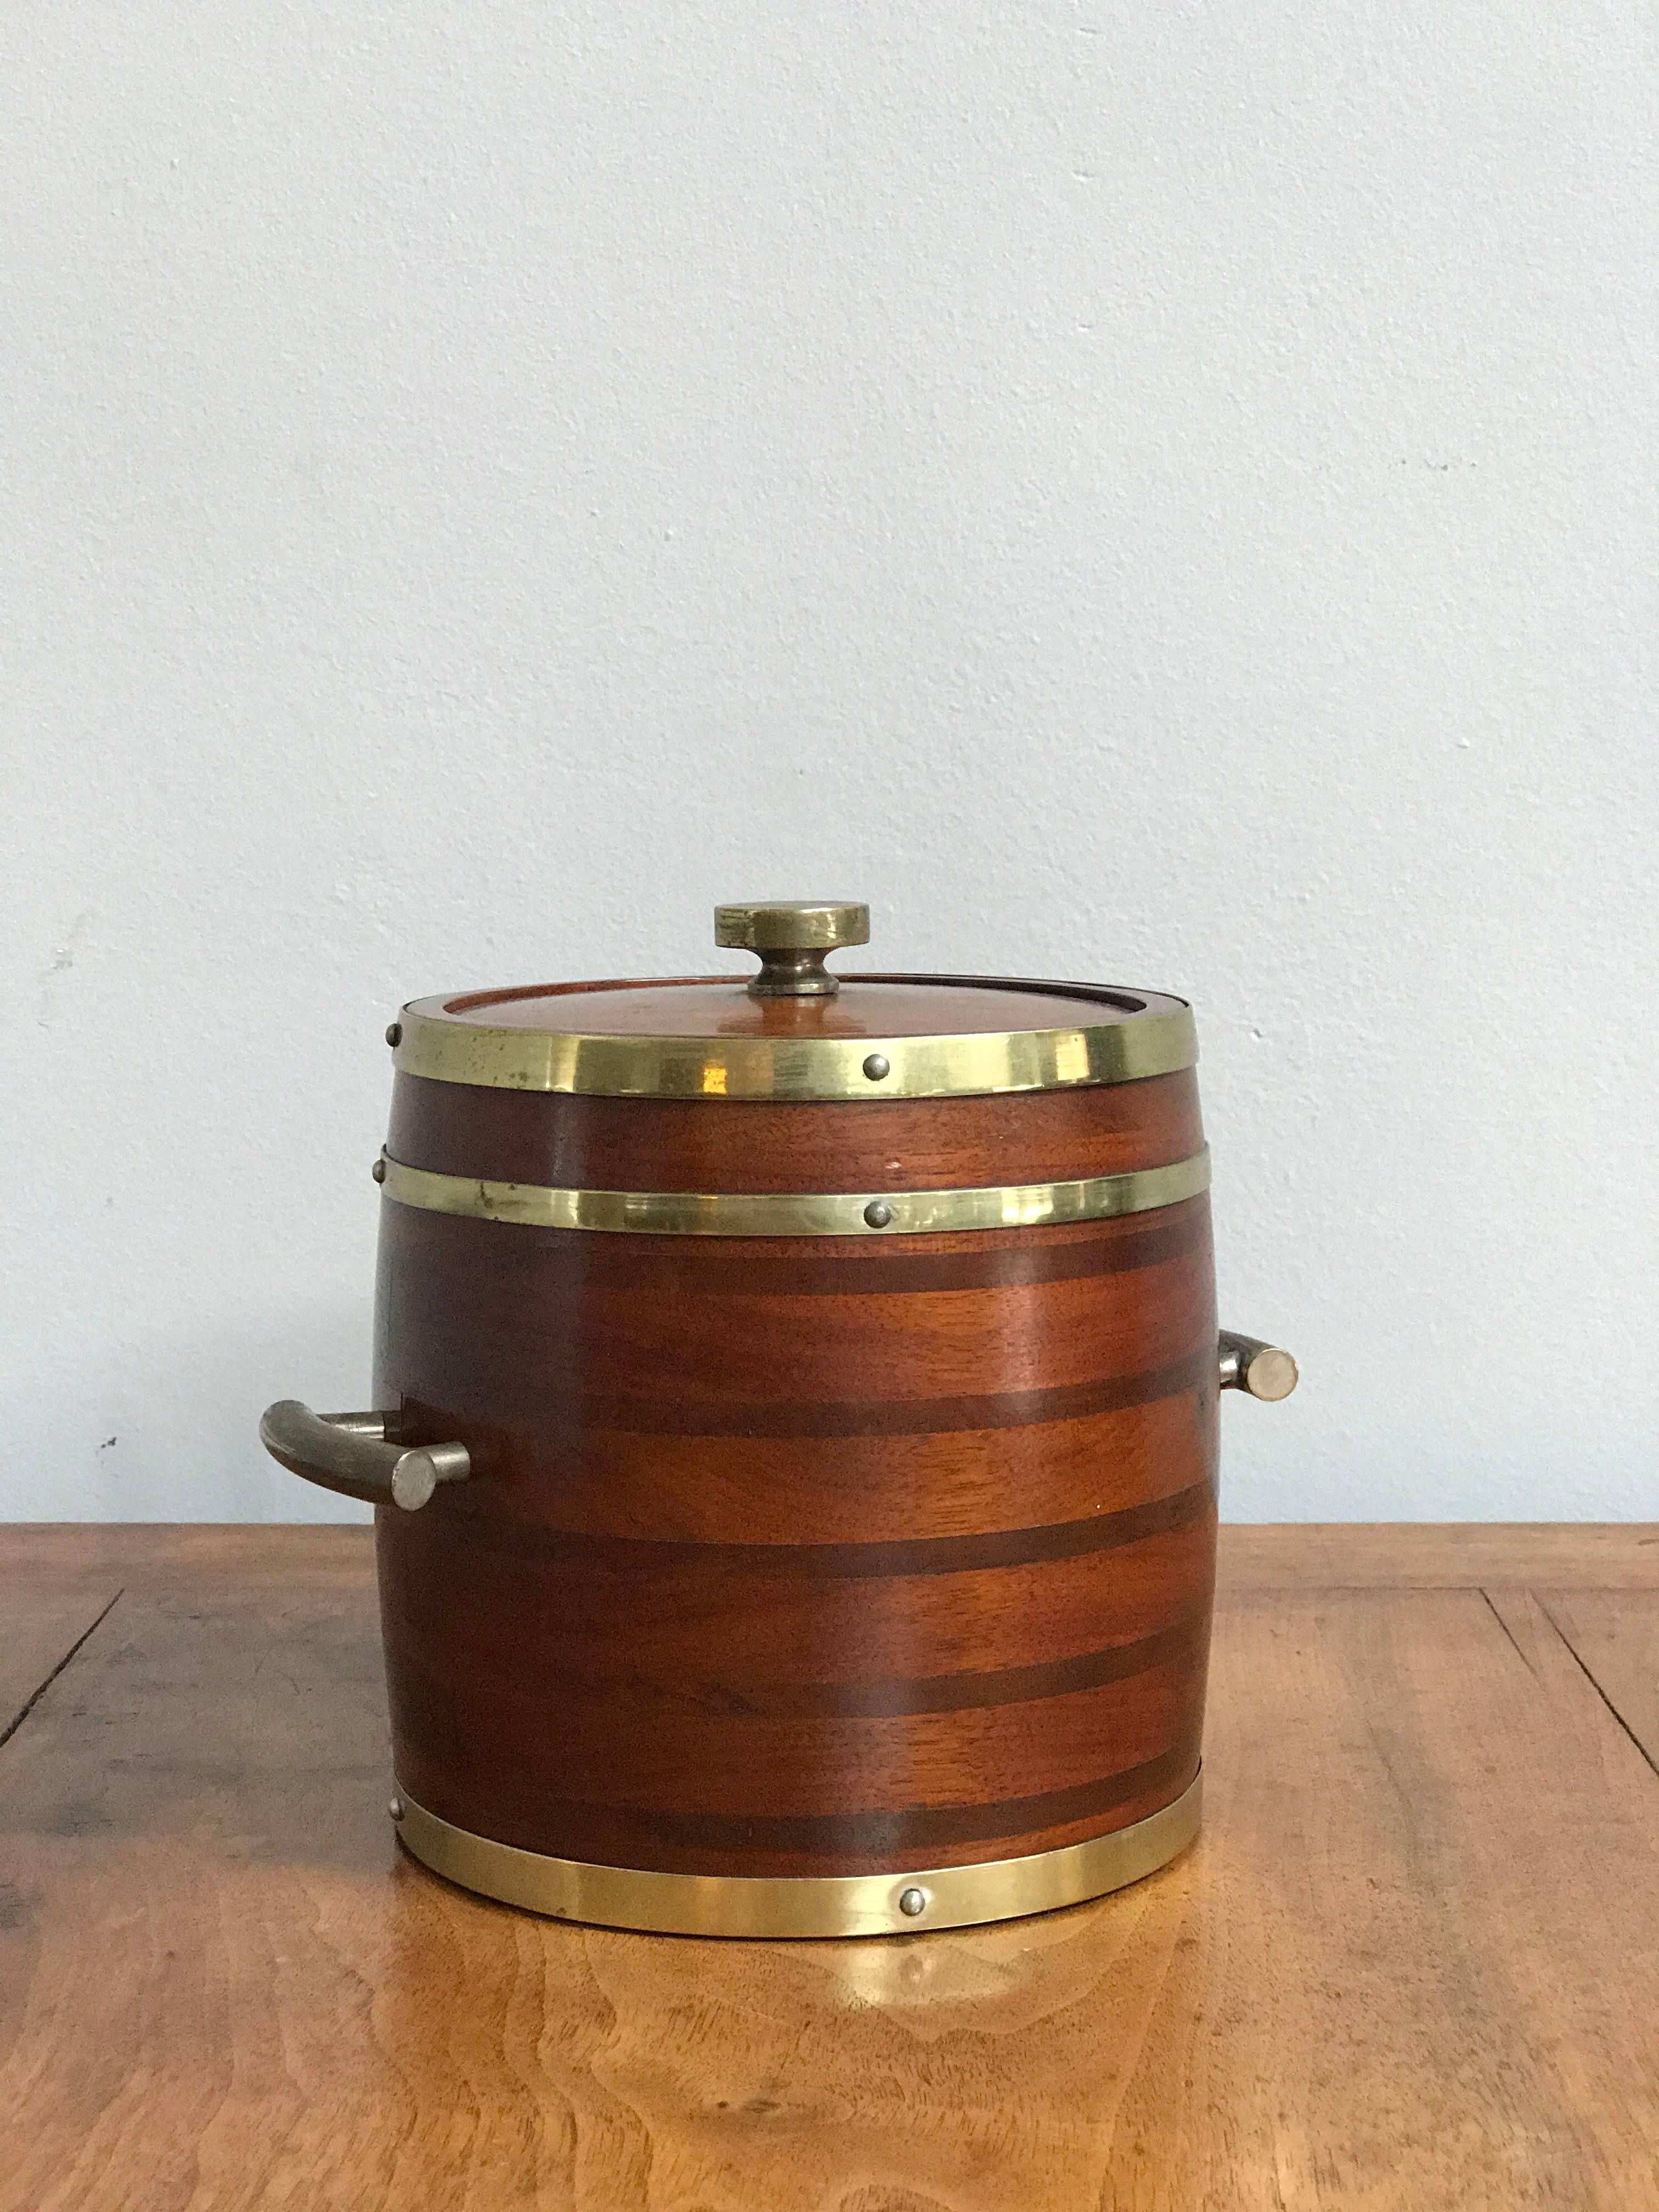 Wooden ice bucket with brass fittings from England circa 1920. 